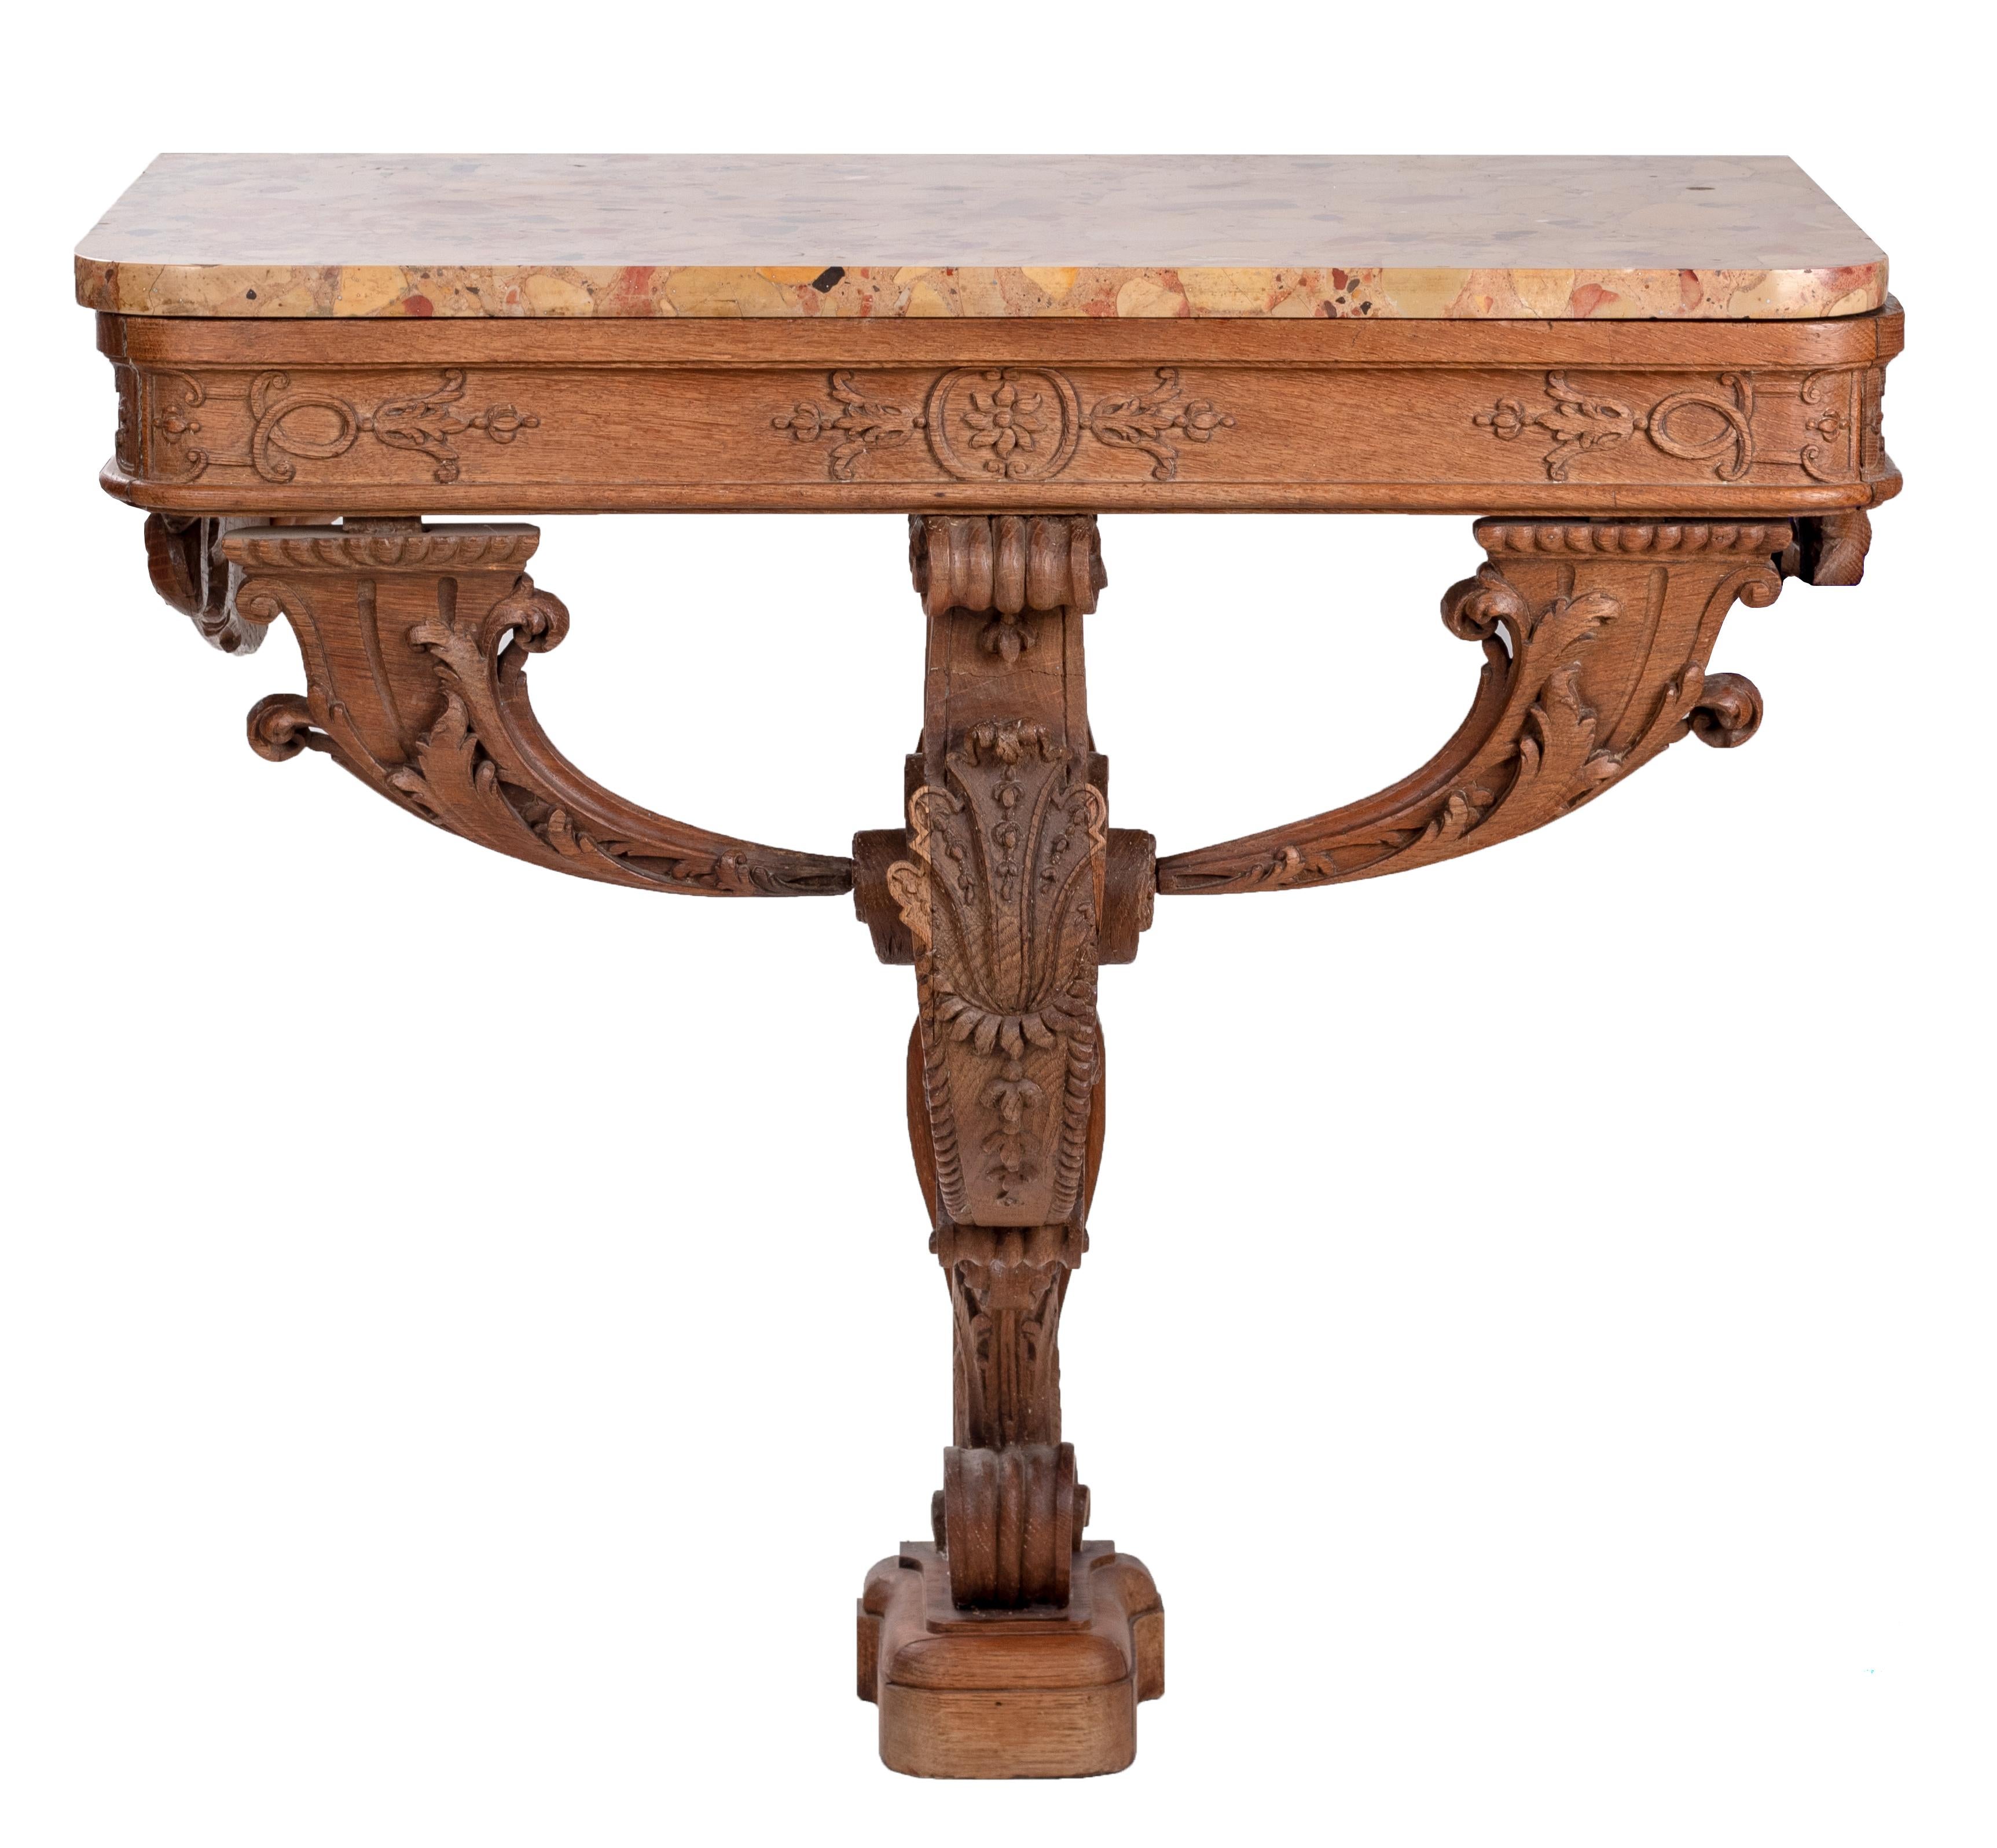 18th century French hand carved wooden one leg console table with marble top.